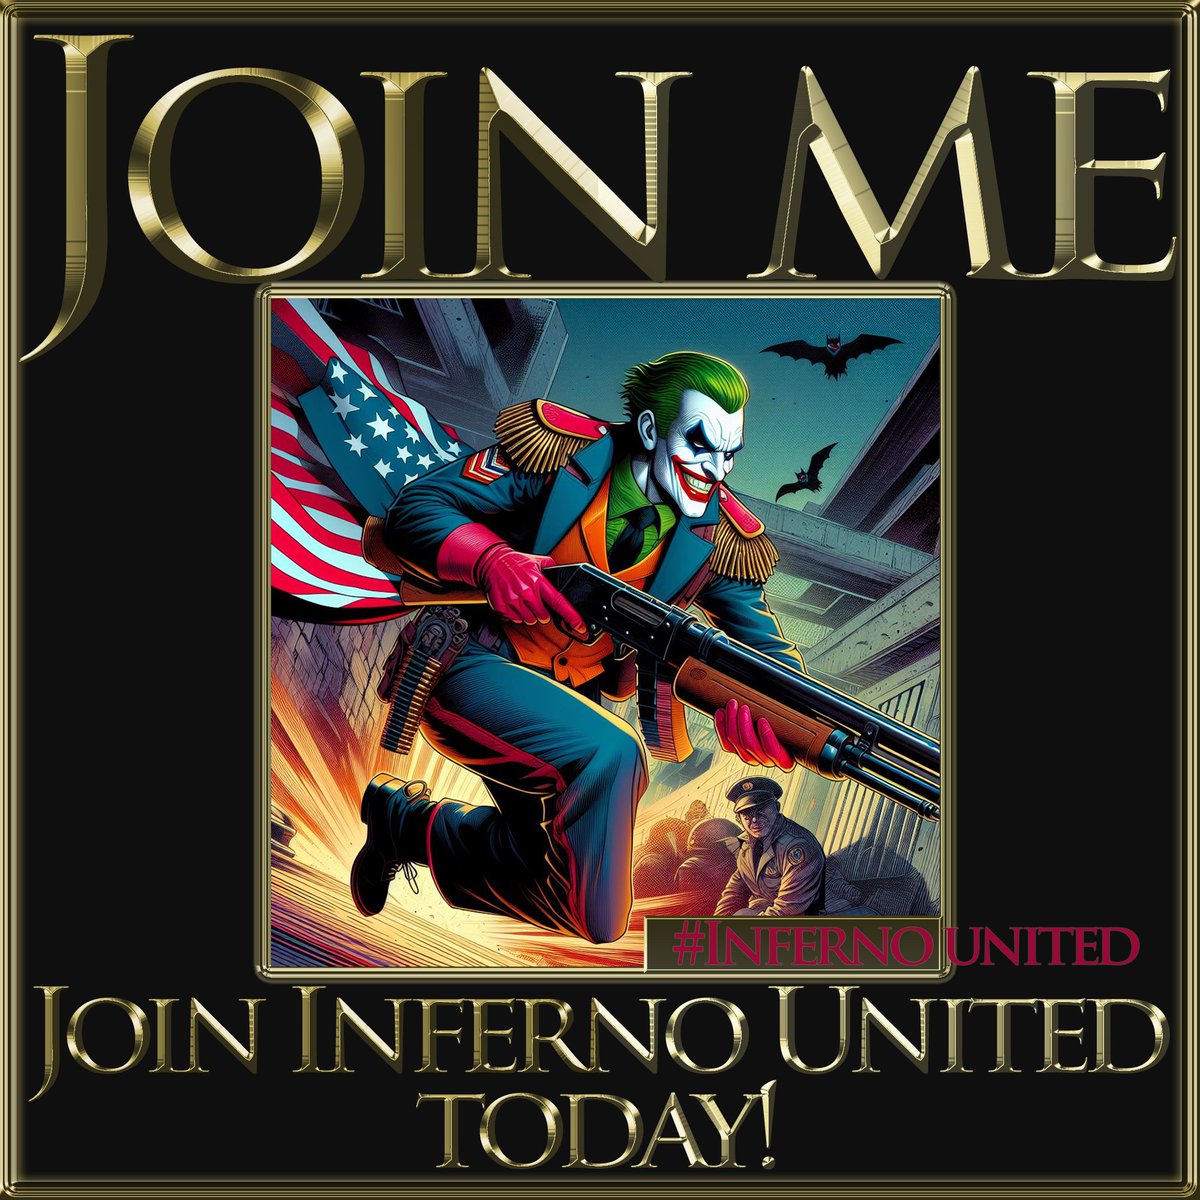 #InfernoUnited inviting all great Conservative Patriots good people to join us.